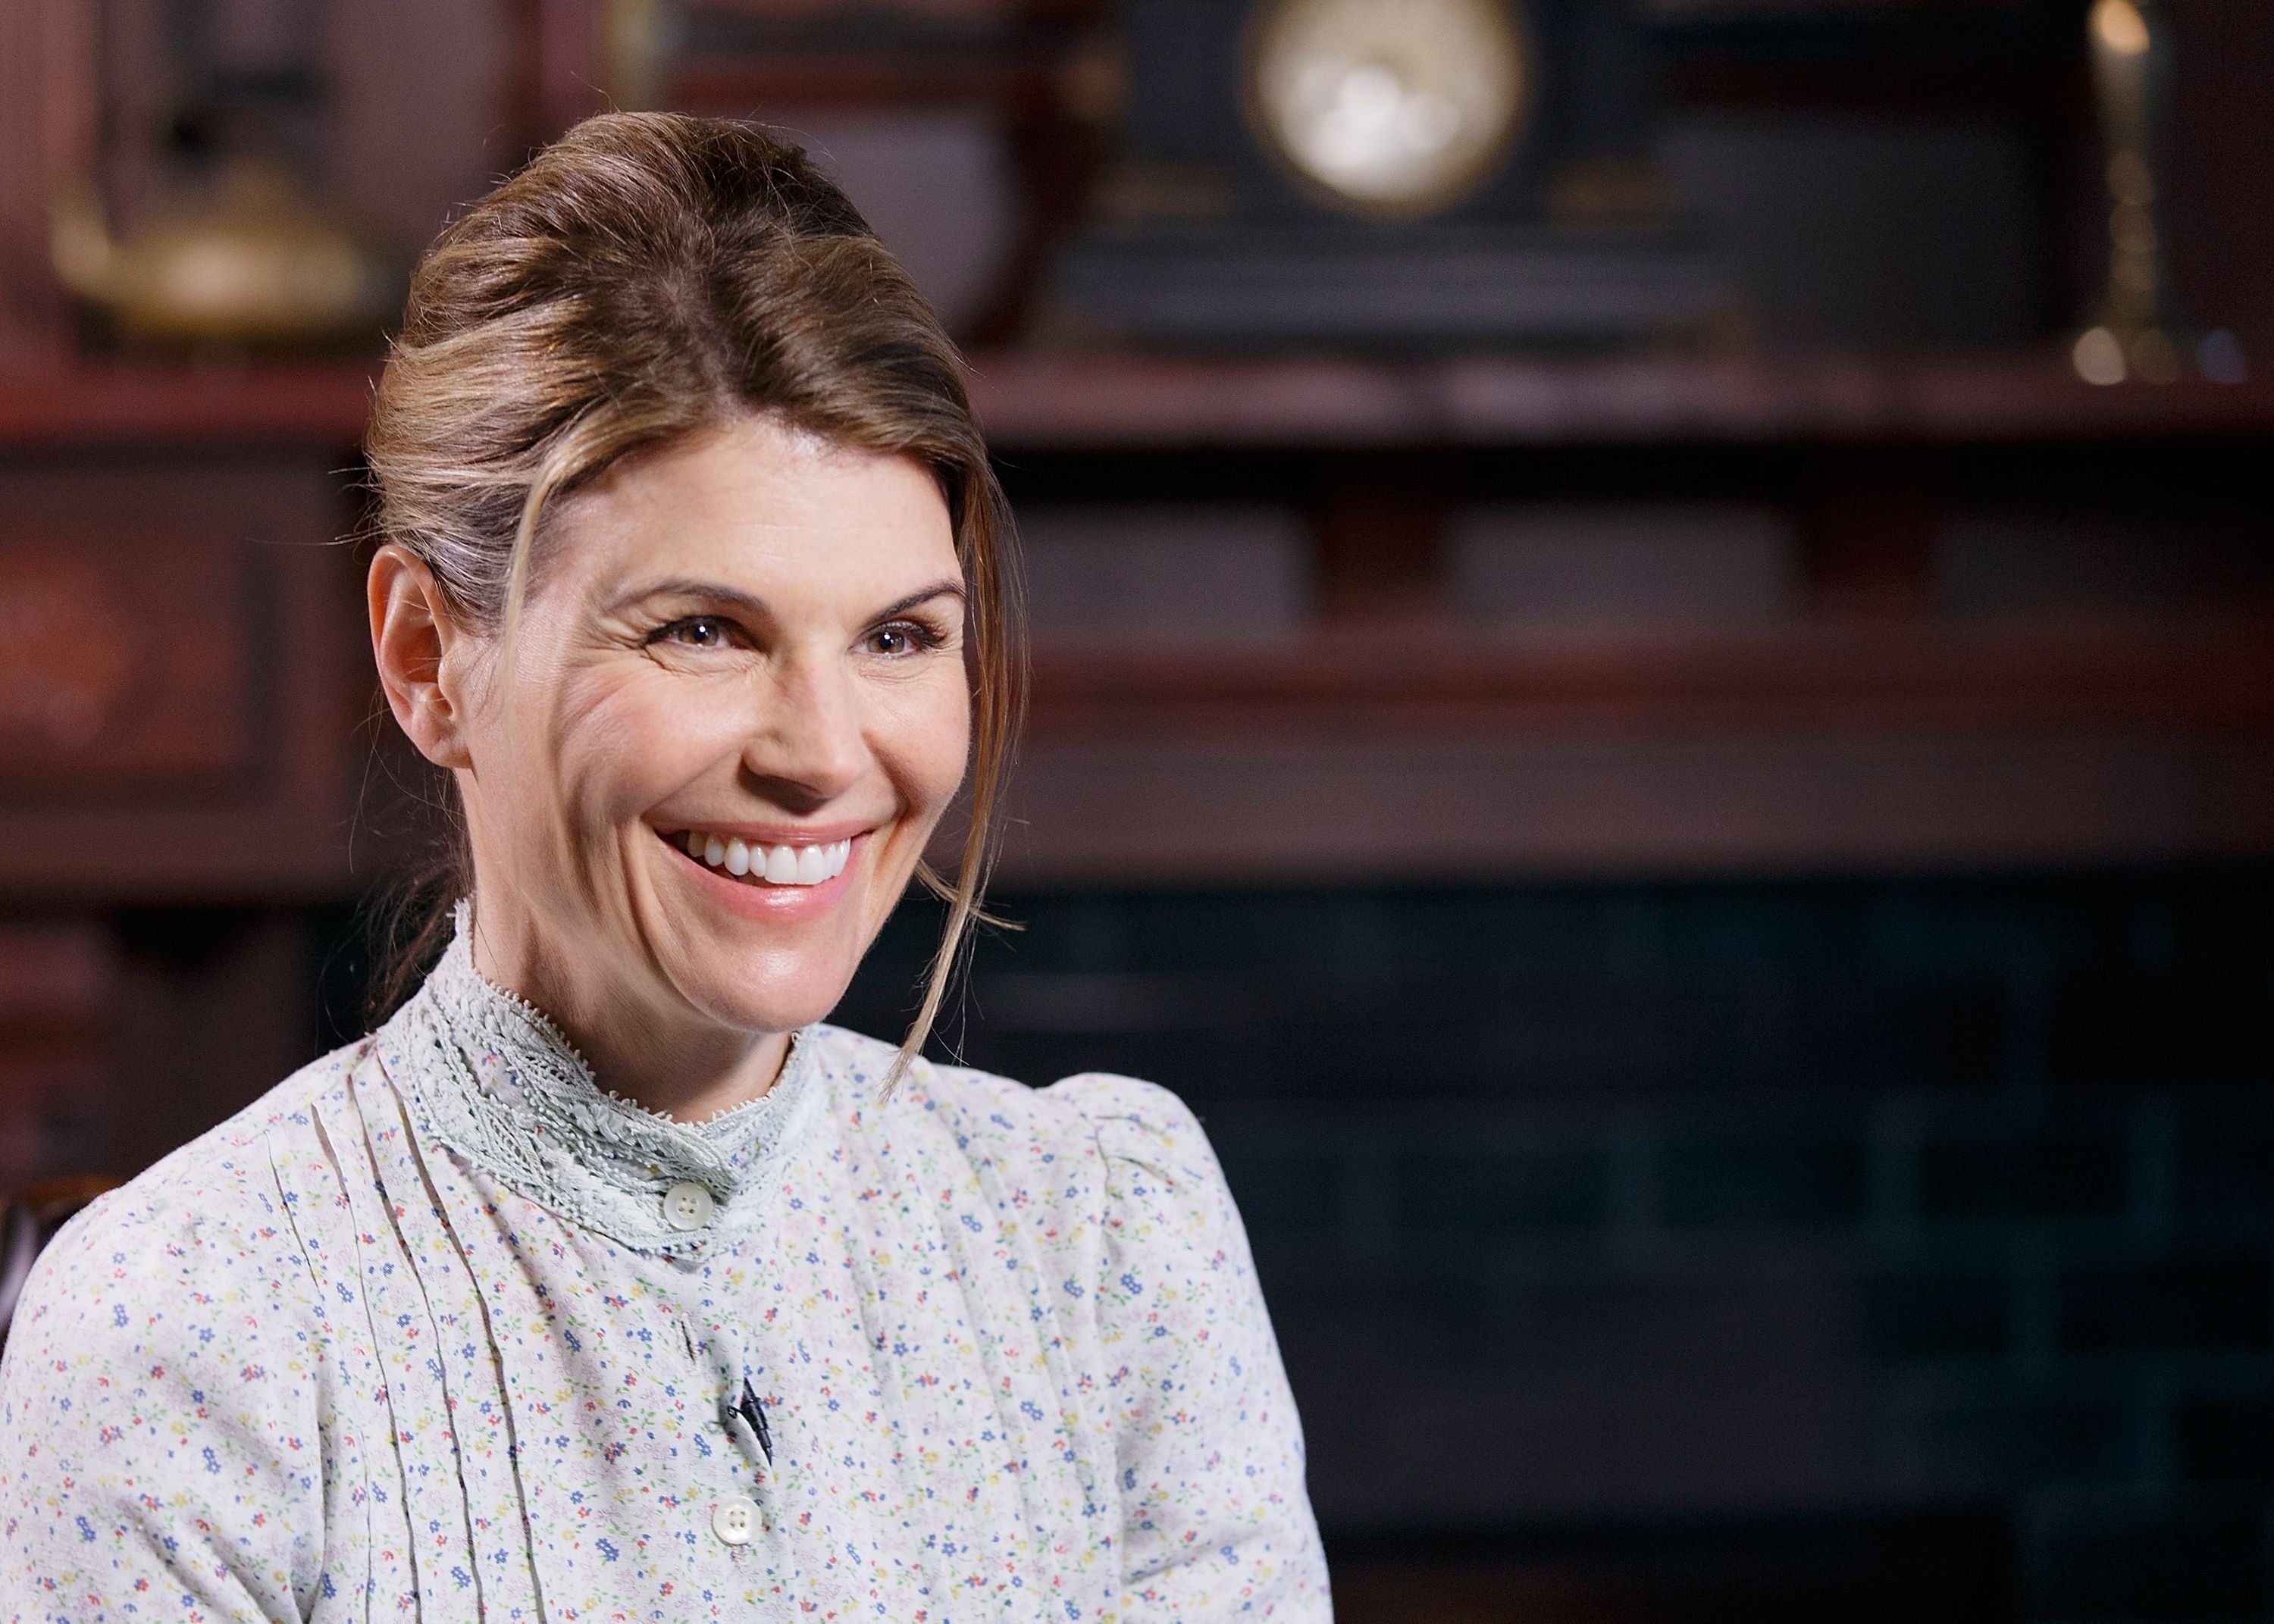 Actress Lori Loughlin on the set of "When Calls the Heart" TV series on February 20, 2014 | Photo: Getty Images